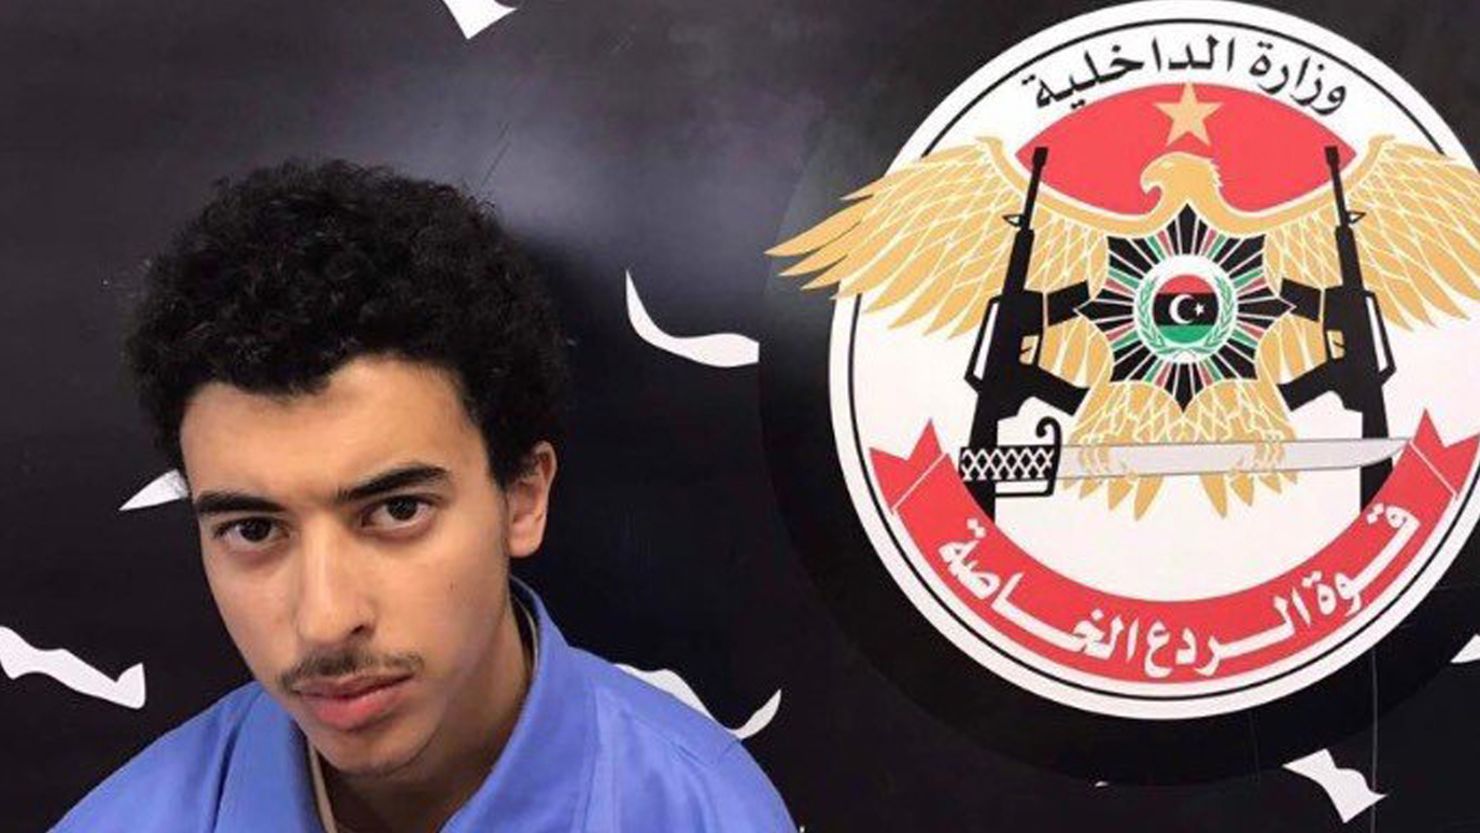 Hashem Abedi was issued with an arrest warrant by British police.